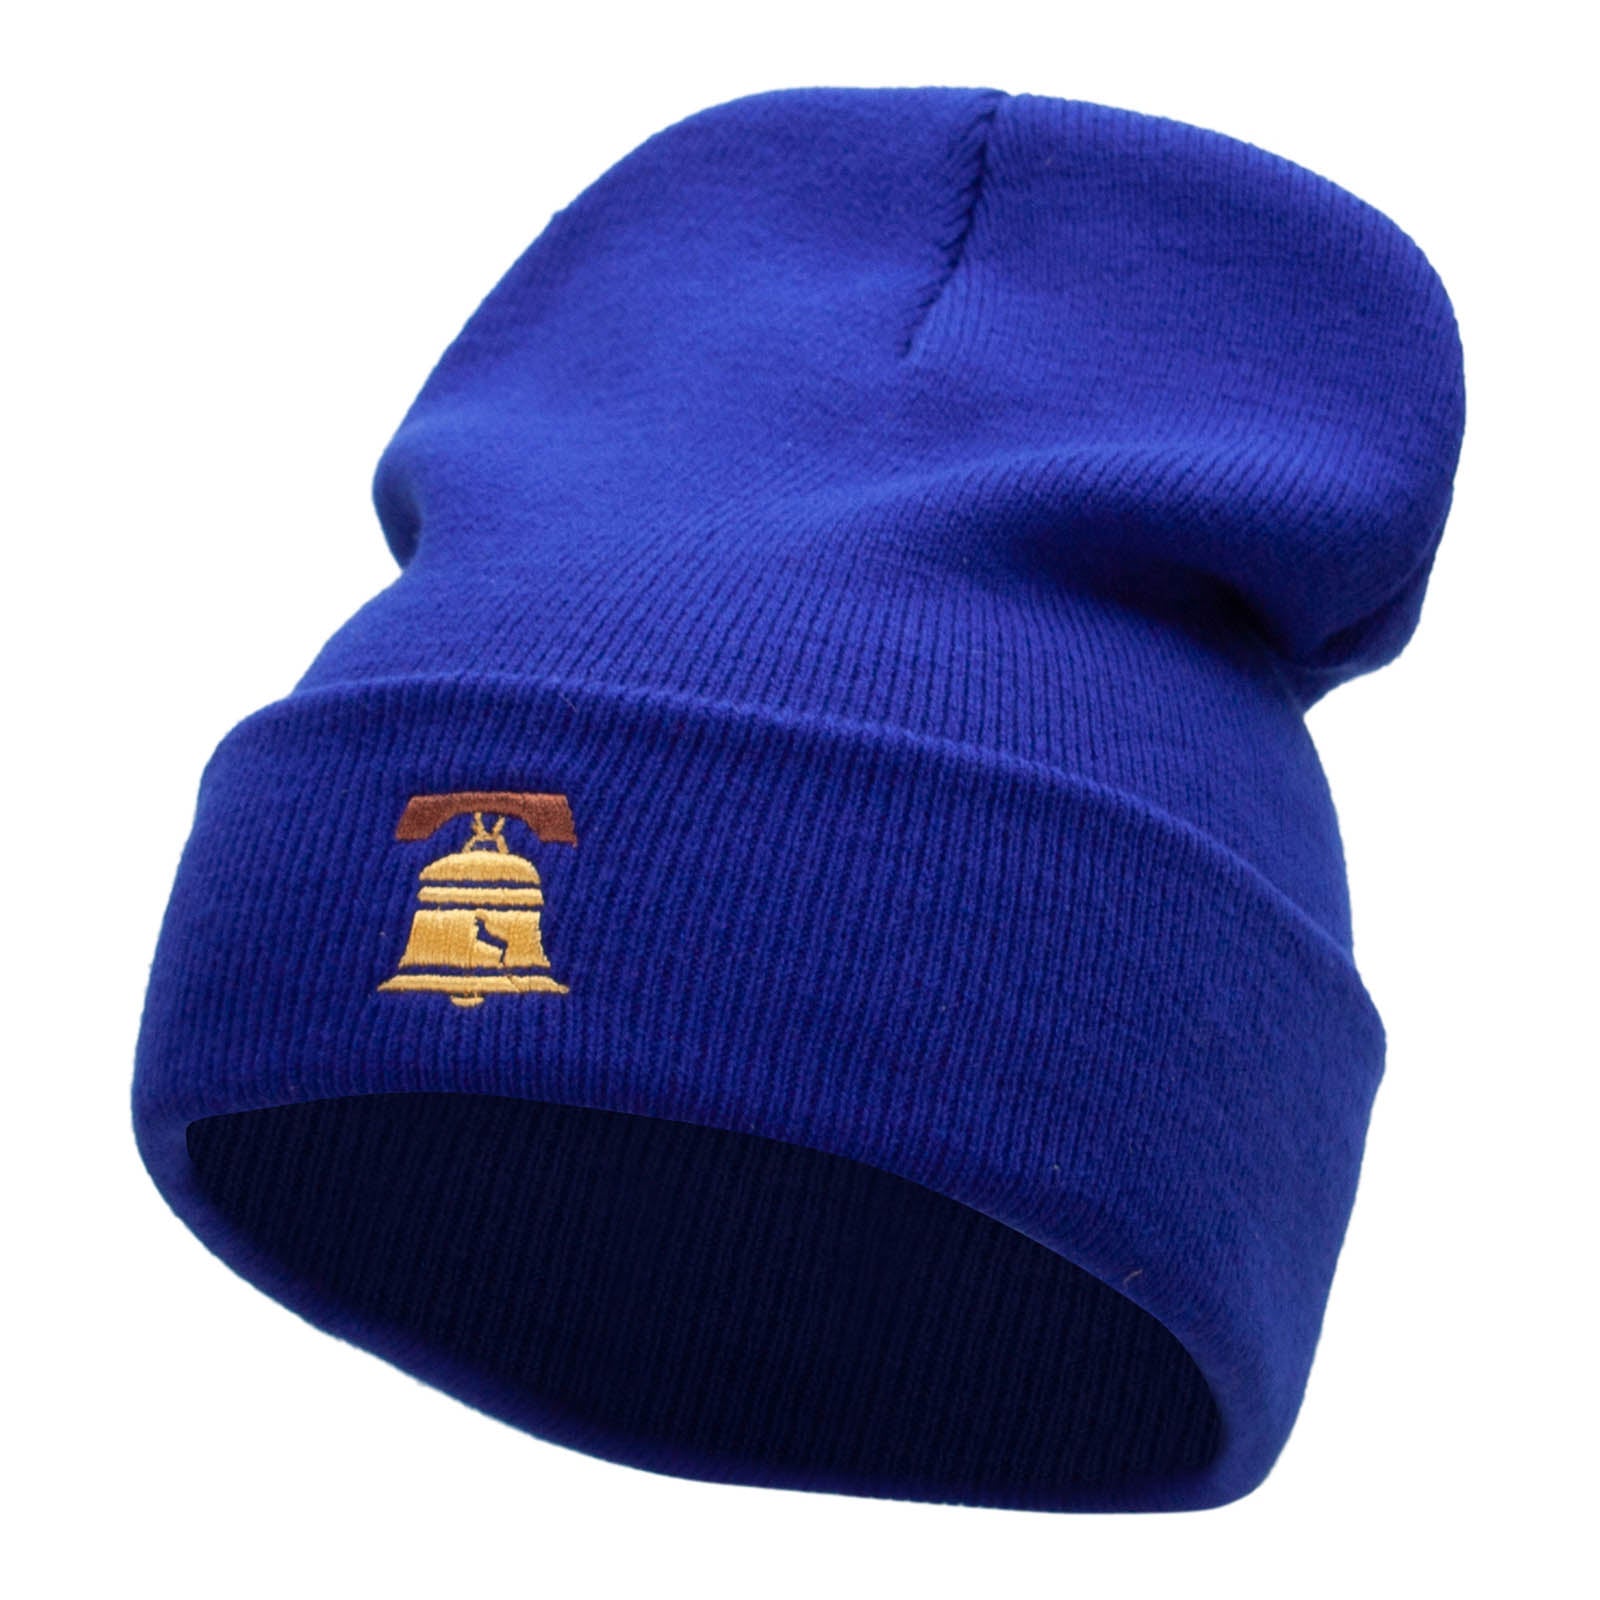 The Liberty Bell Embroidered 12 Inch Long Knitted Beanie - Royal OSFM